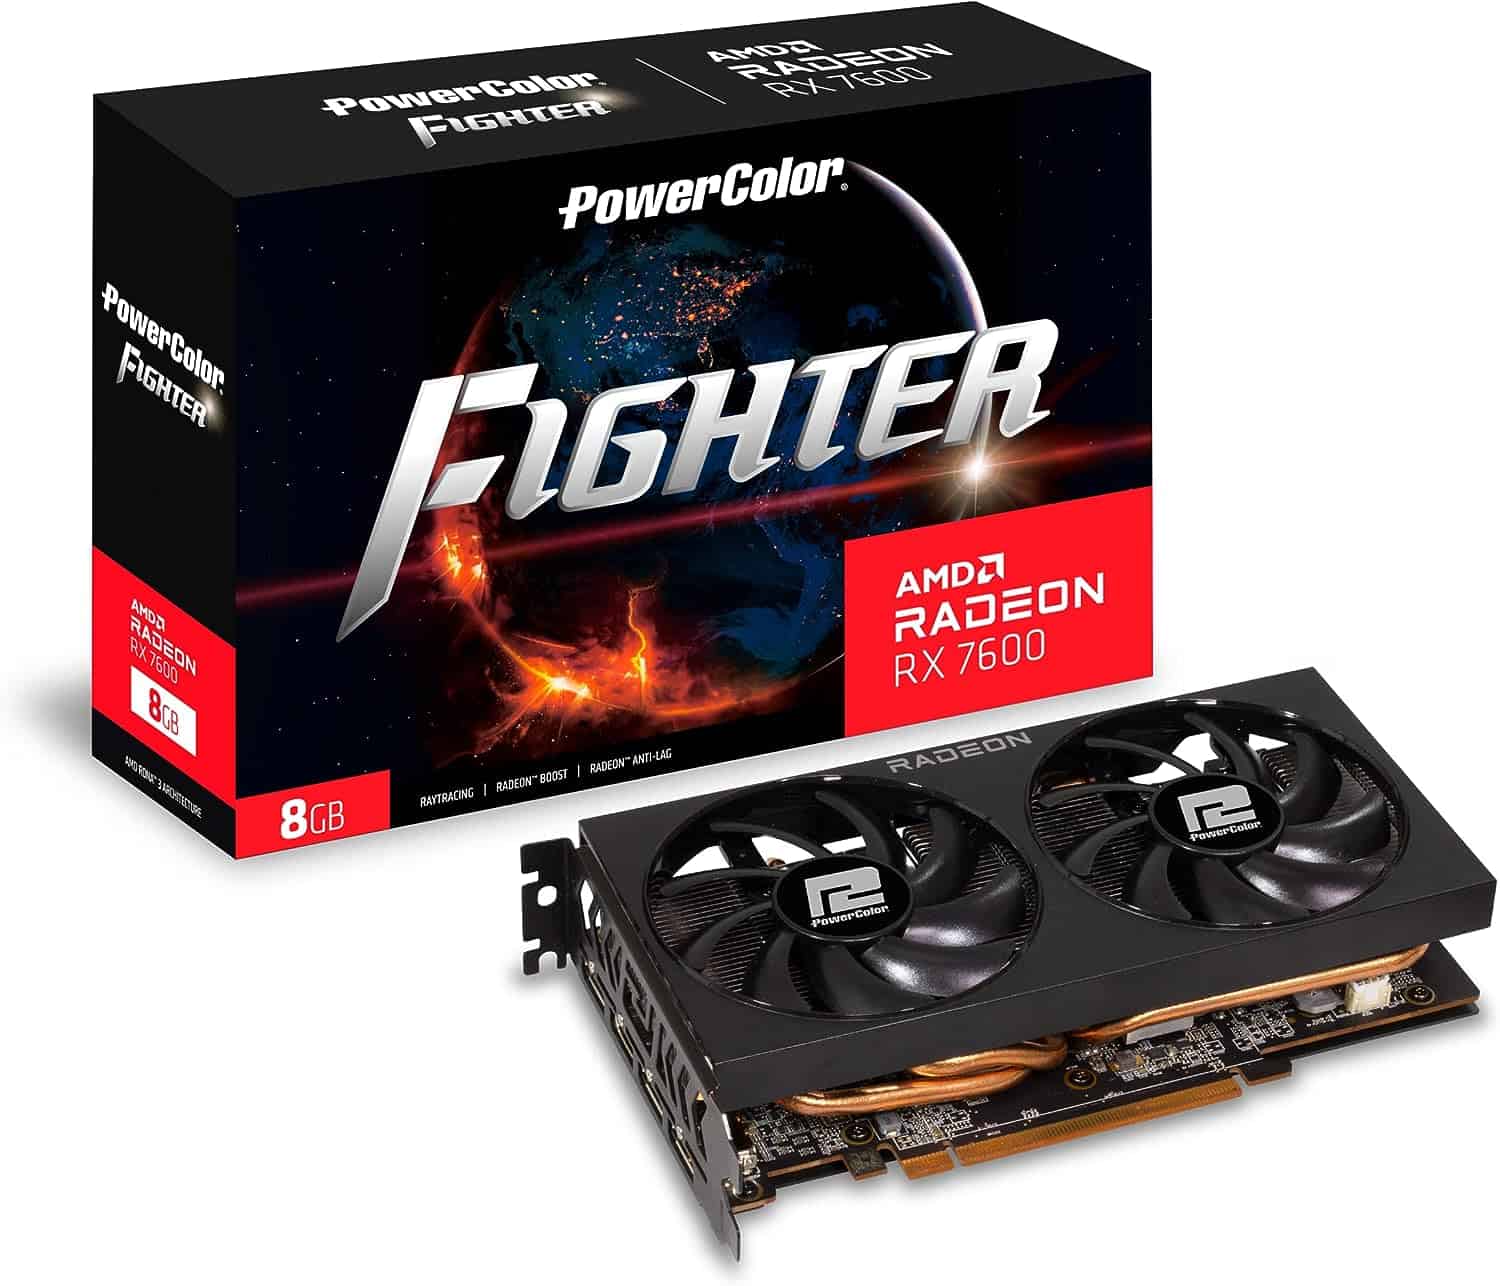 PowerColor Fighter AMD Radeon RX 7600 gaming graphics card.